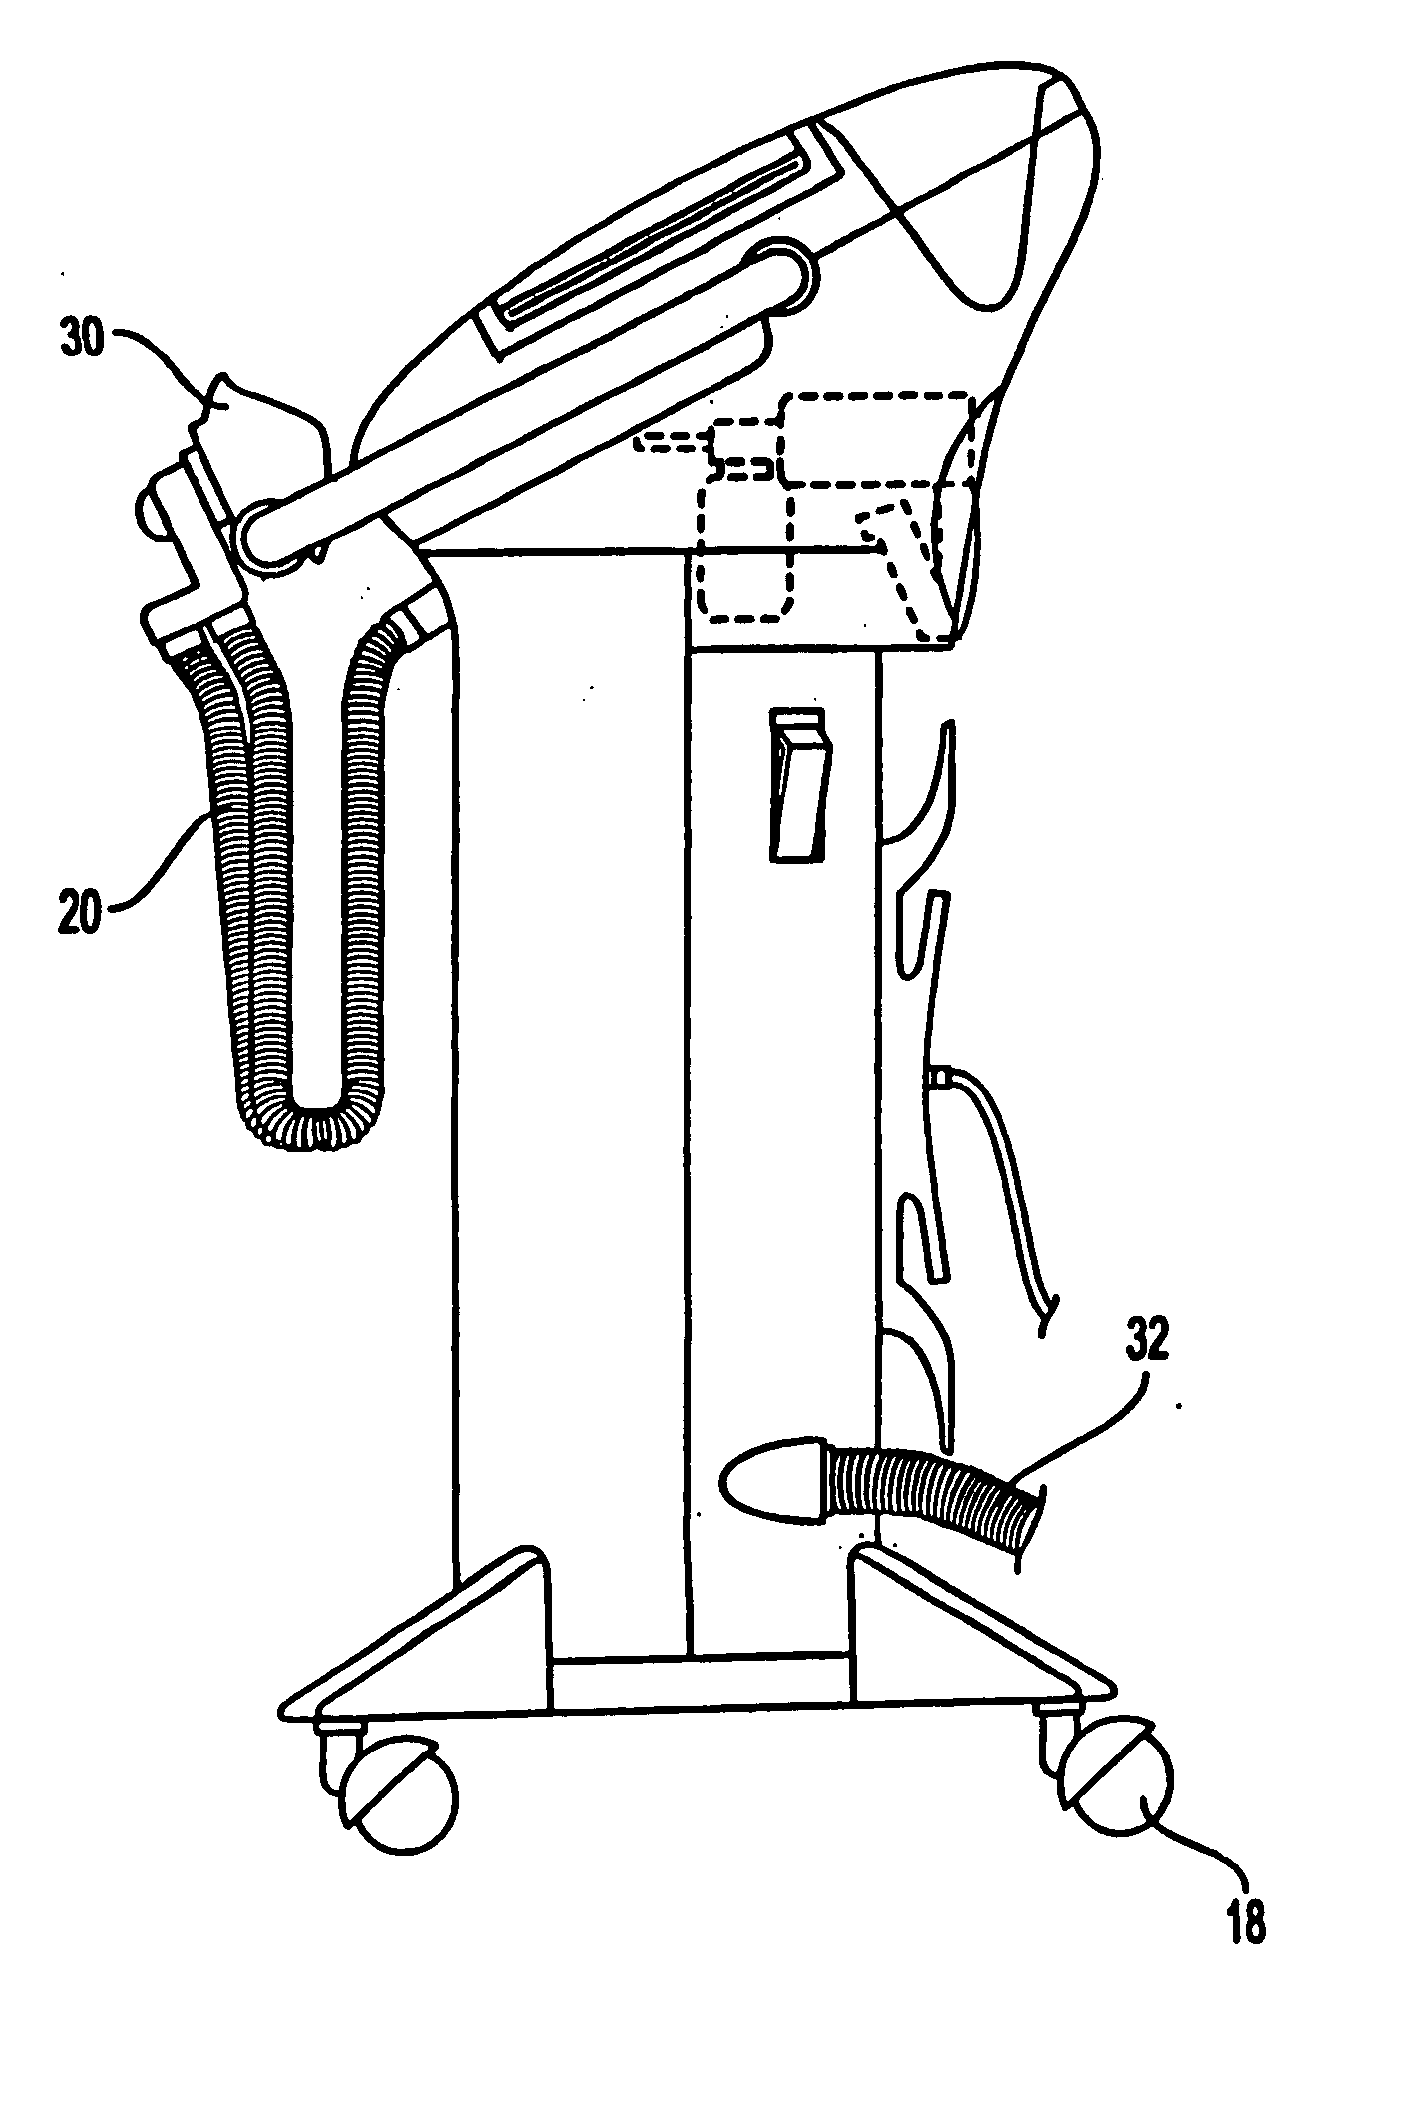 Apparatus, method and drug products for providing a conscious patient relief from pain and anxiety associated with medical or surgical procedures